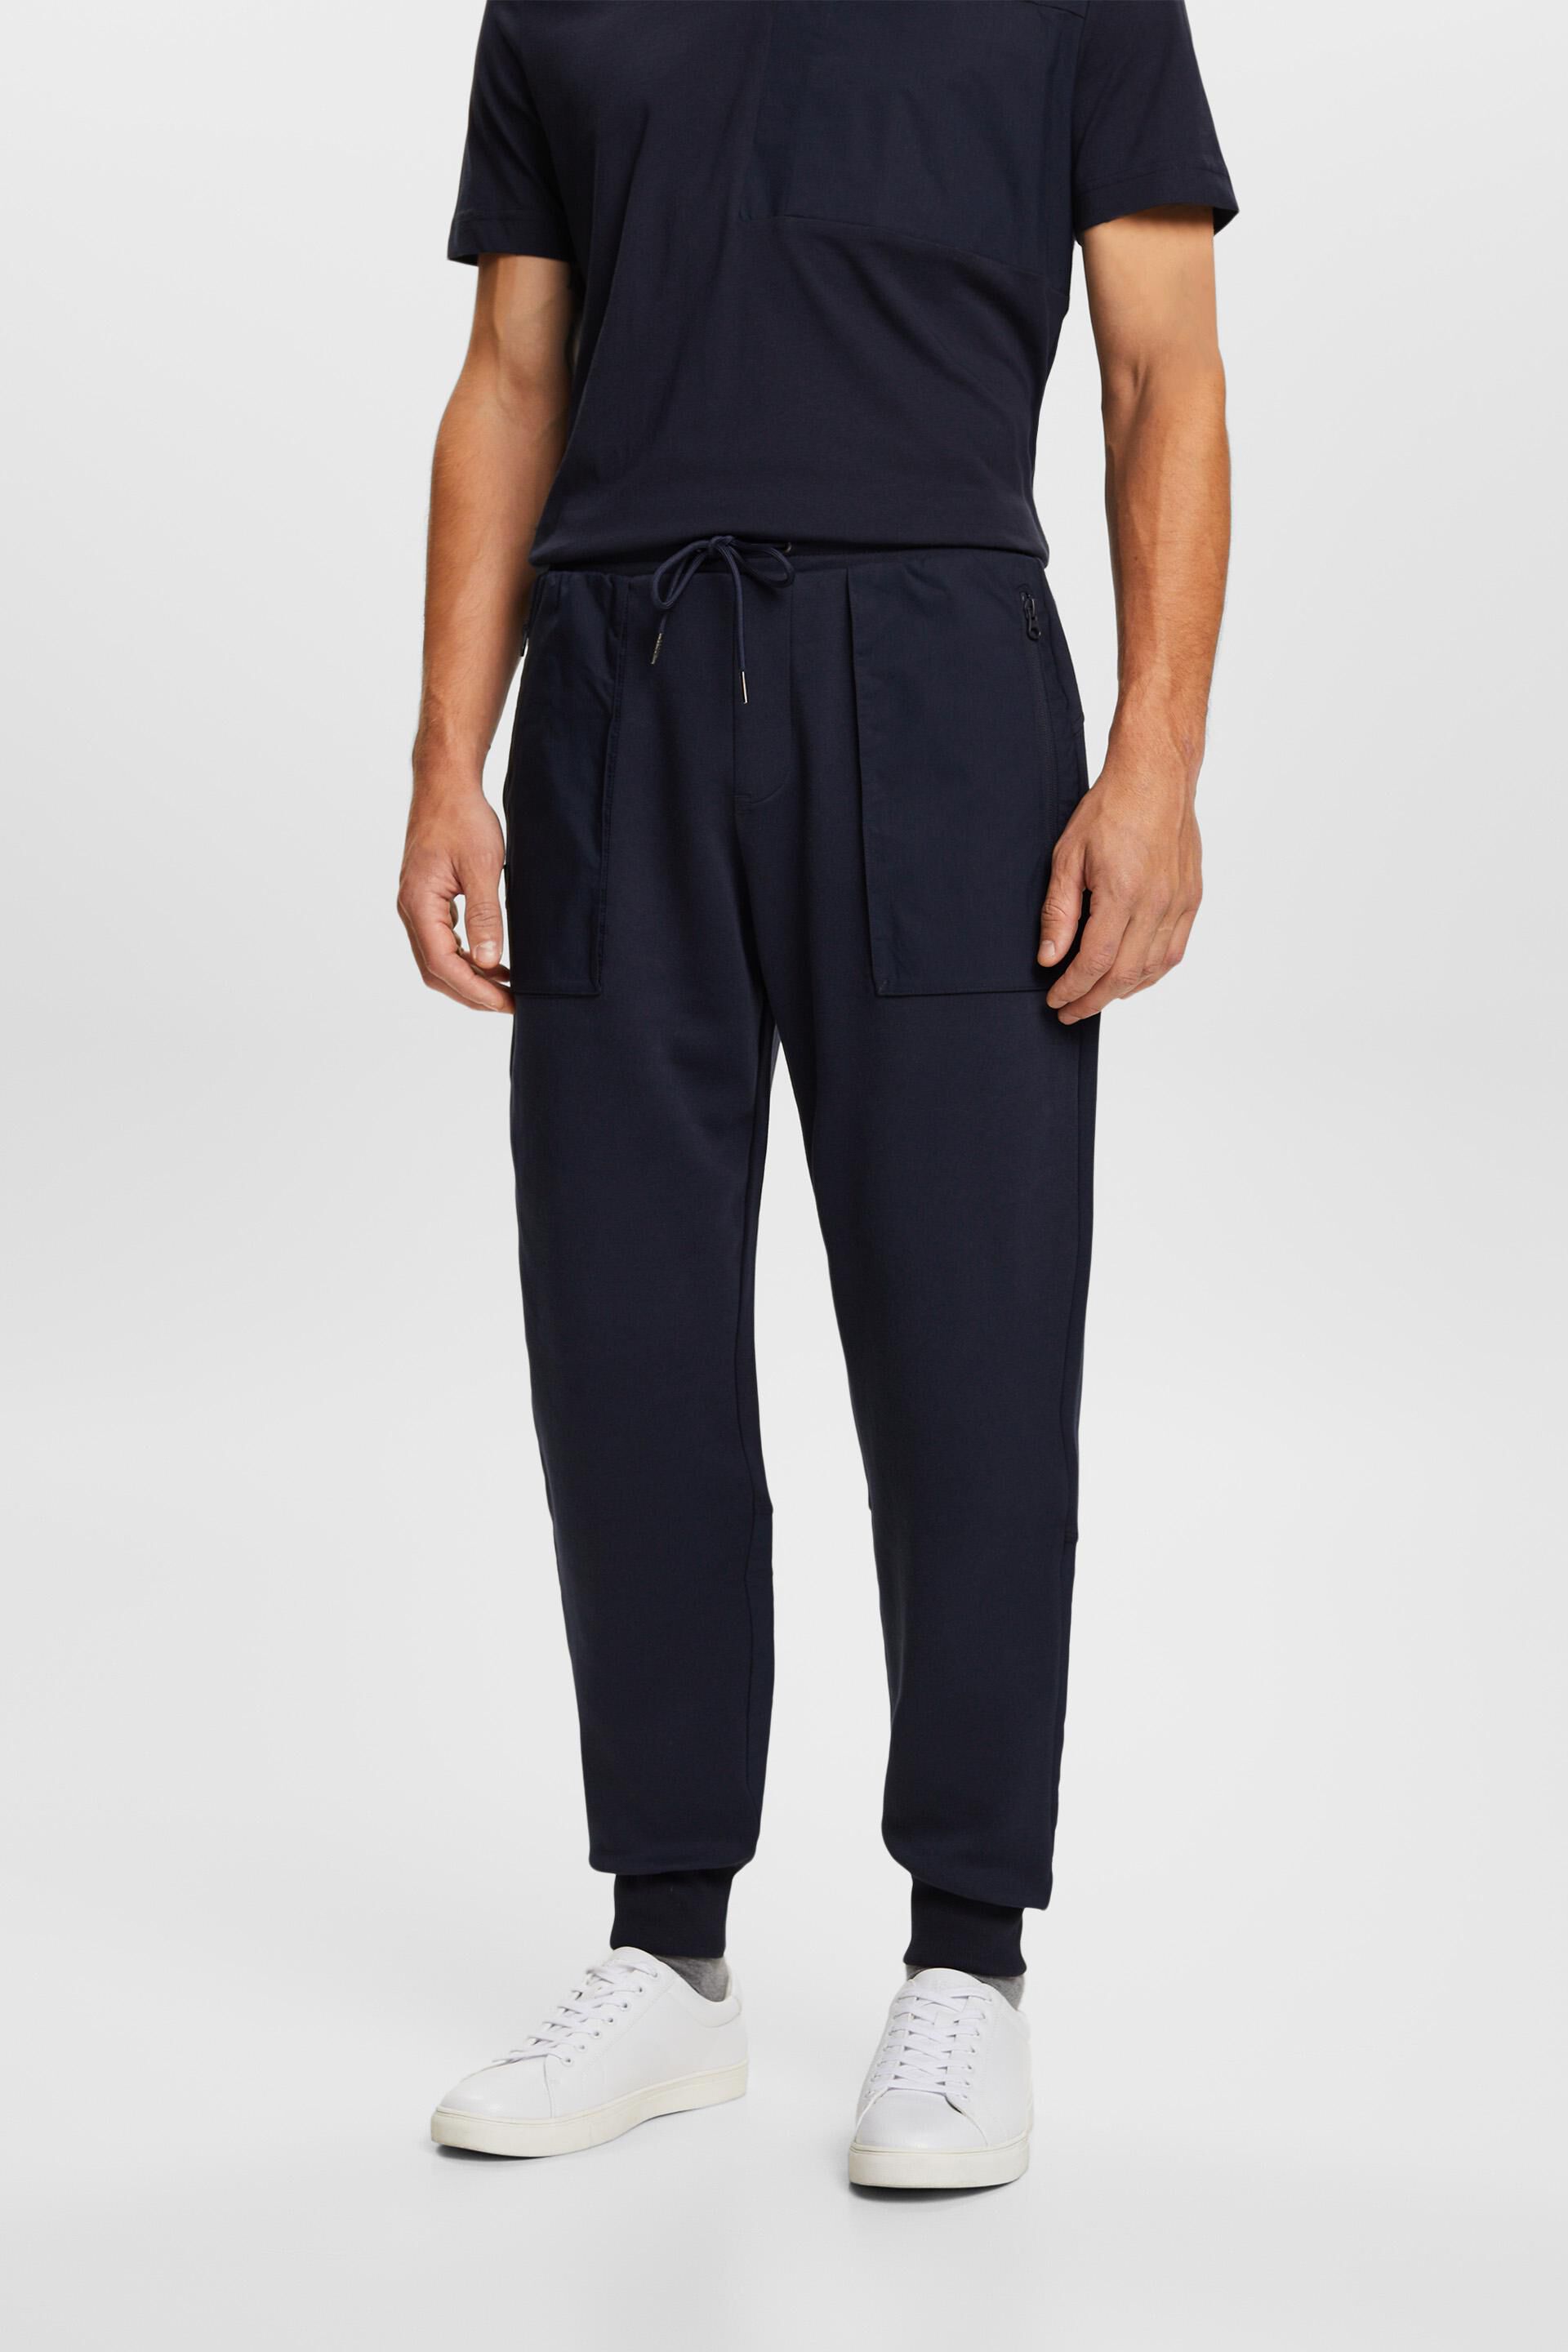 Esprit joggers in mixed material Fashion